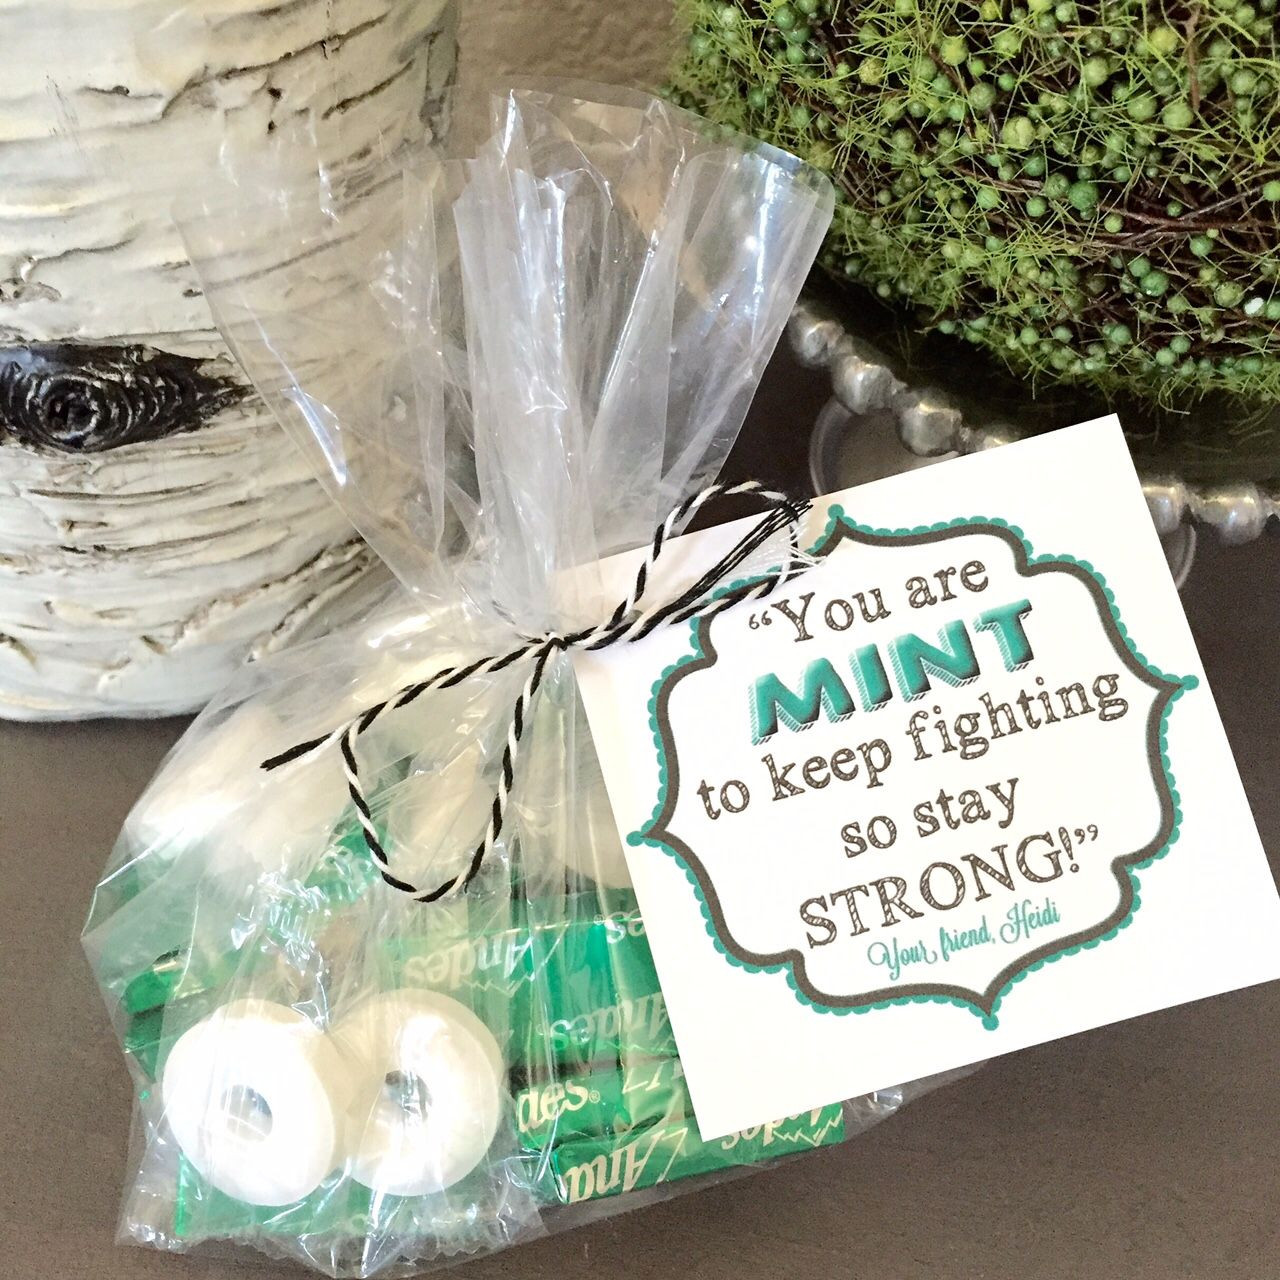 Chemotherapy Gift Ideas
 MINT to stay strong DIY and Gift Ideas